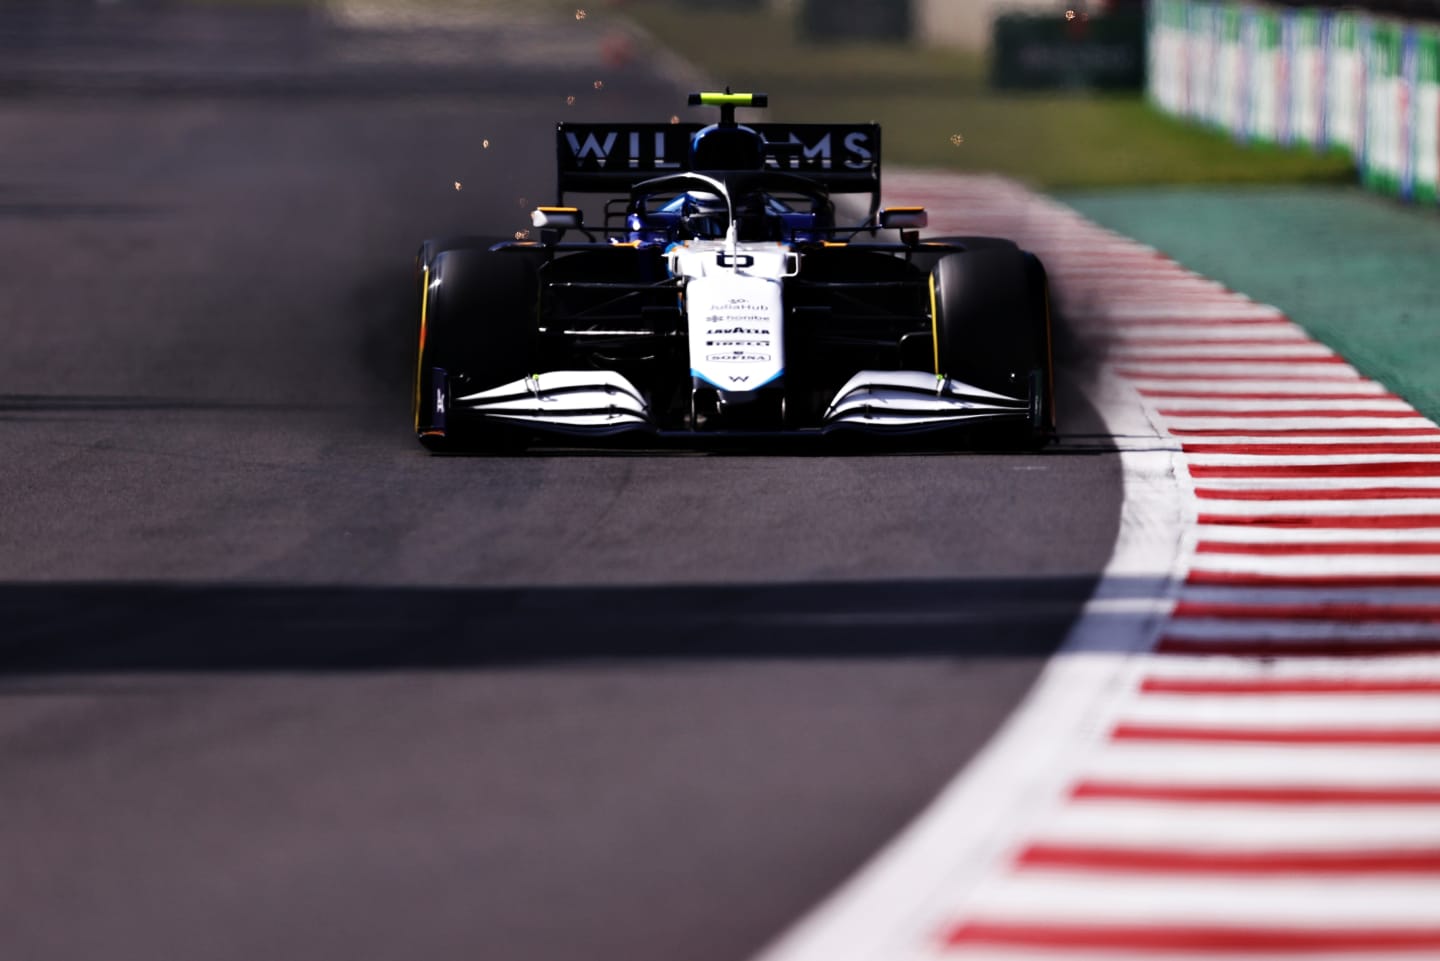 MEXICO CITY, MEXICO - NOVEMBER 06: Brake dust pours from the front brakes of Nicholas Latifi of Canada driving the (6) Williams Racing FW43B Mercedes during qualifying ahead of the F1 Grand Prix of Mexico at Autodromo Hermanos Rodriguez on November 06, 2021 in Mexico City, Mexico. (Photo by Lars Baron/Getty Images)